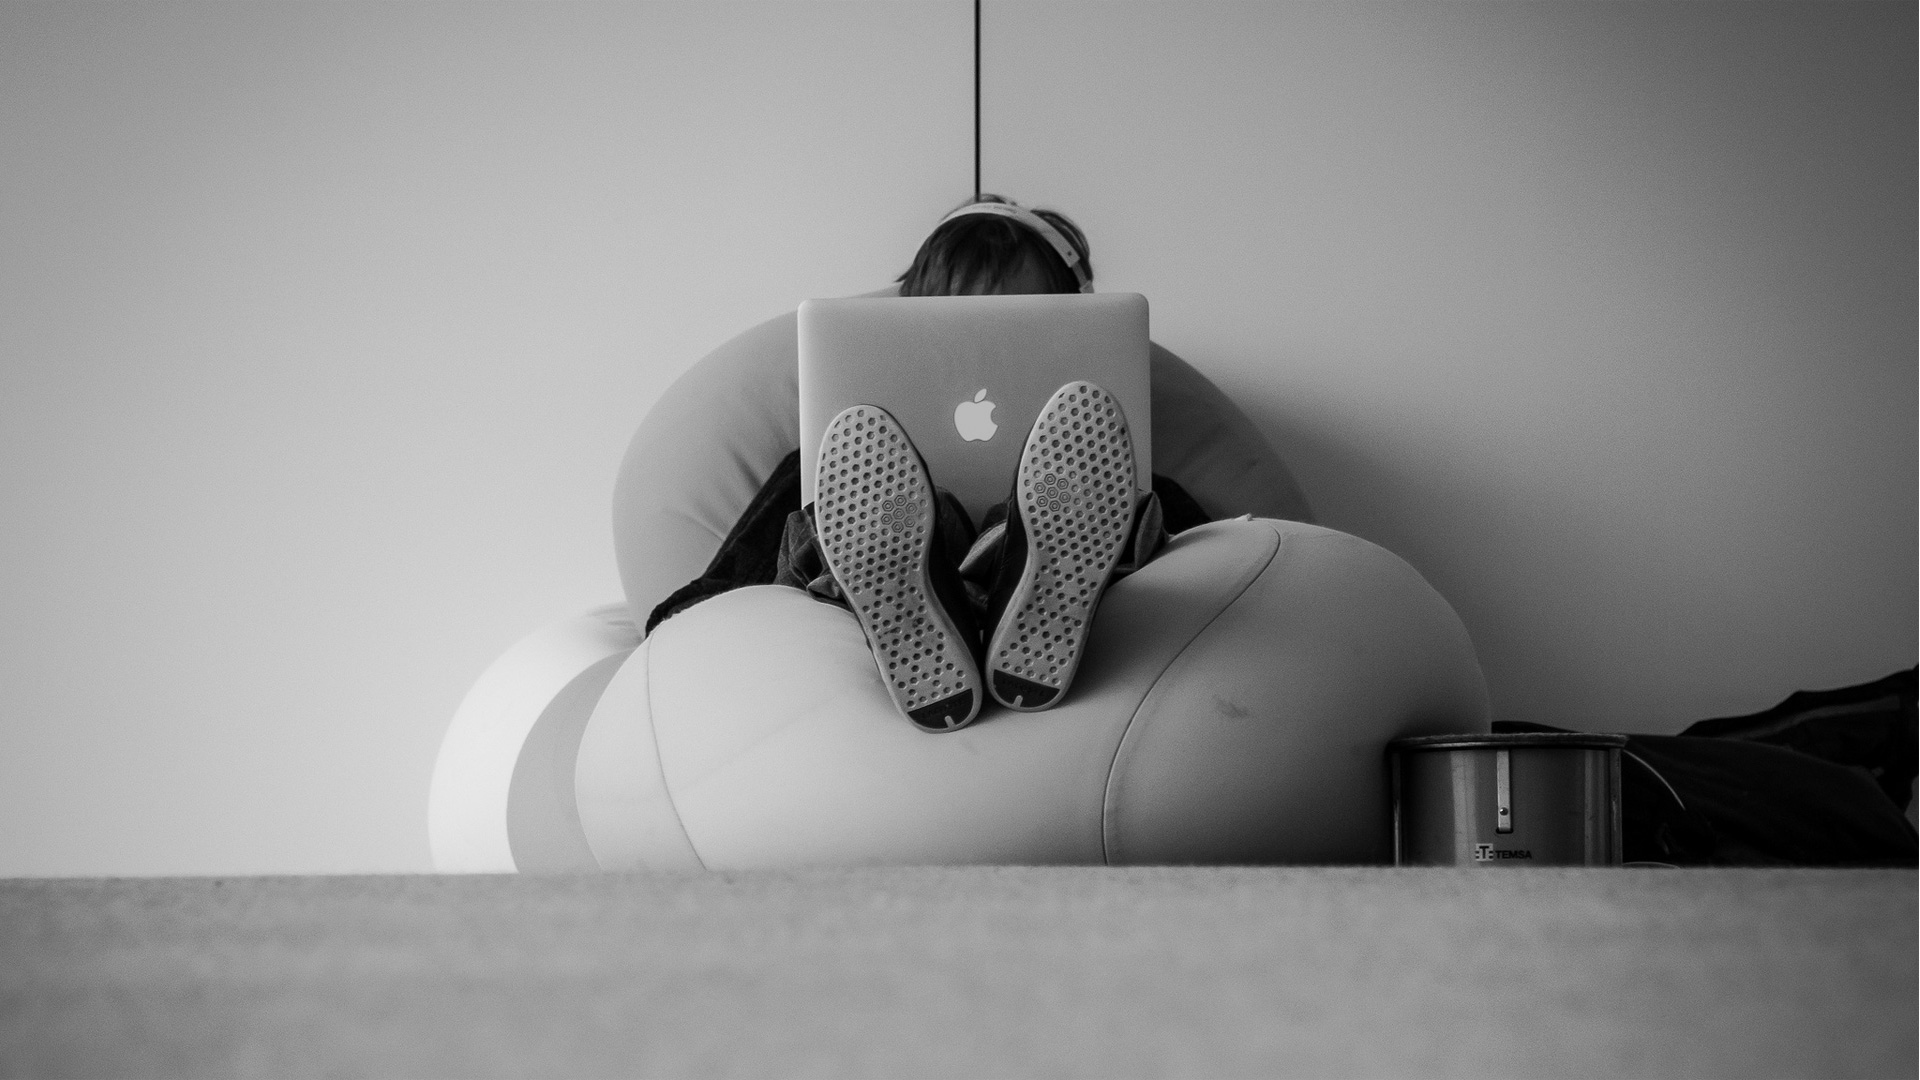 Man sitting alone with computer covering his face